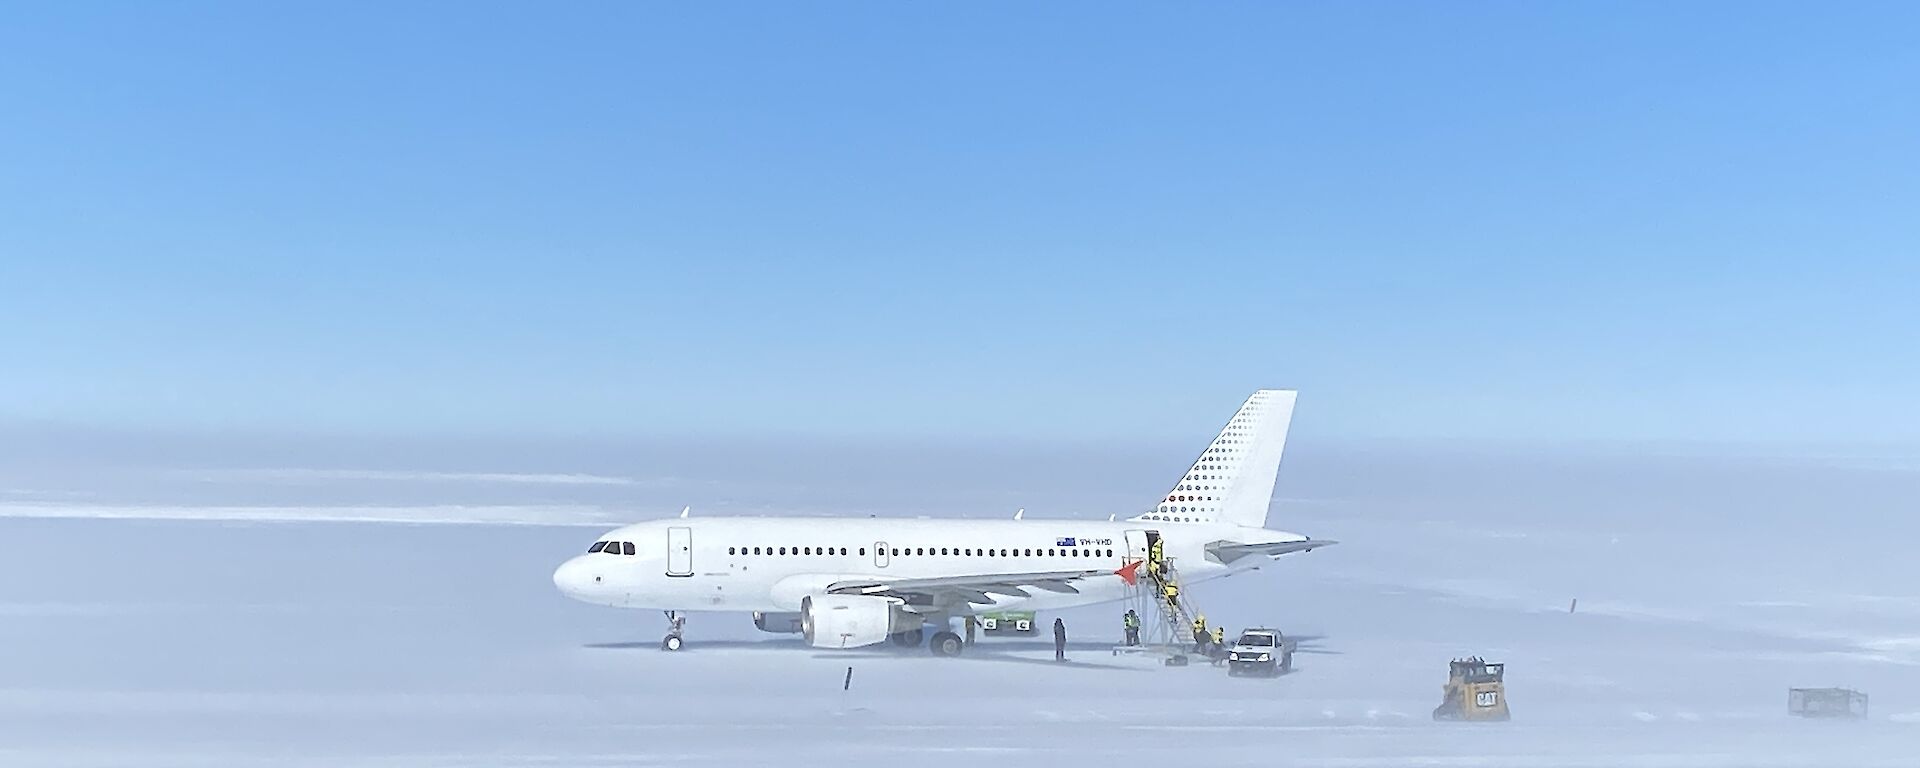 A319 Airbus sitting on the ice runway with support crew surrounding